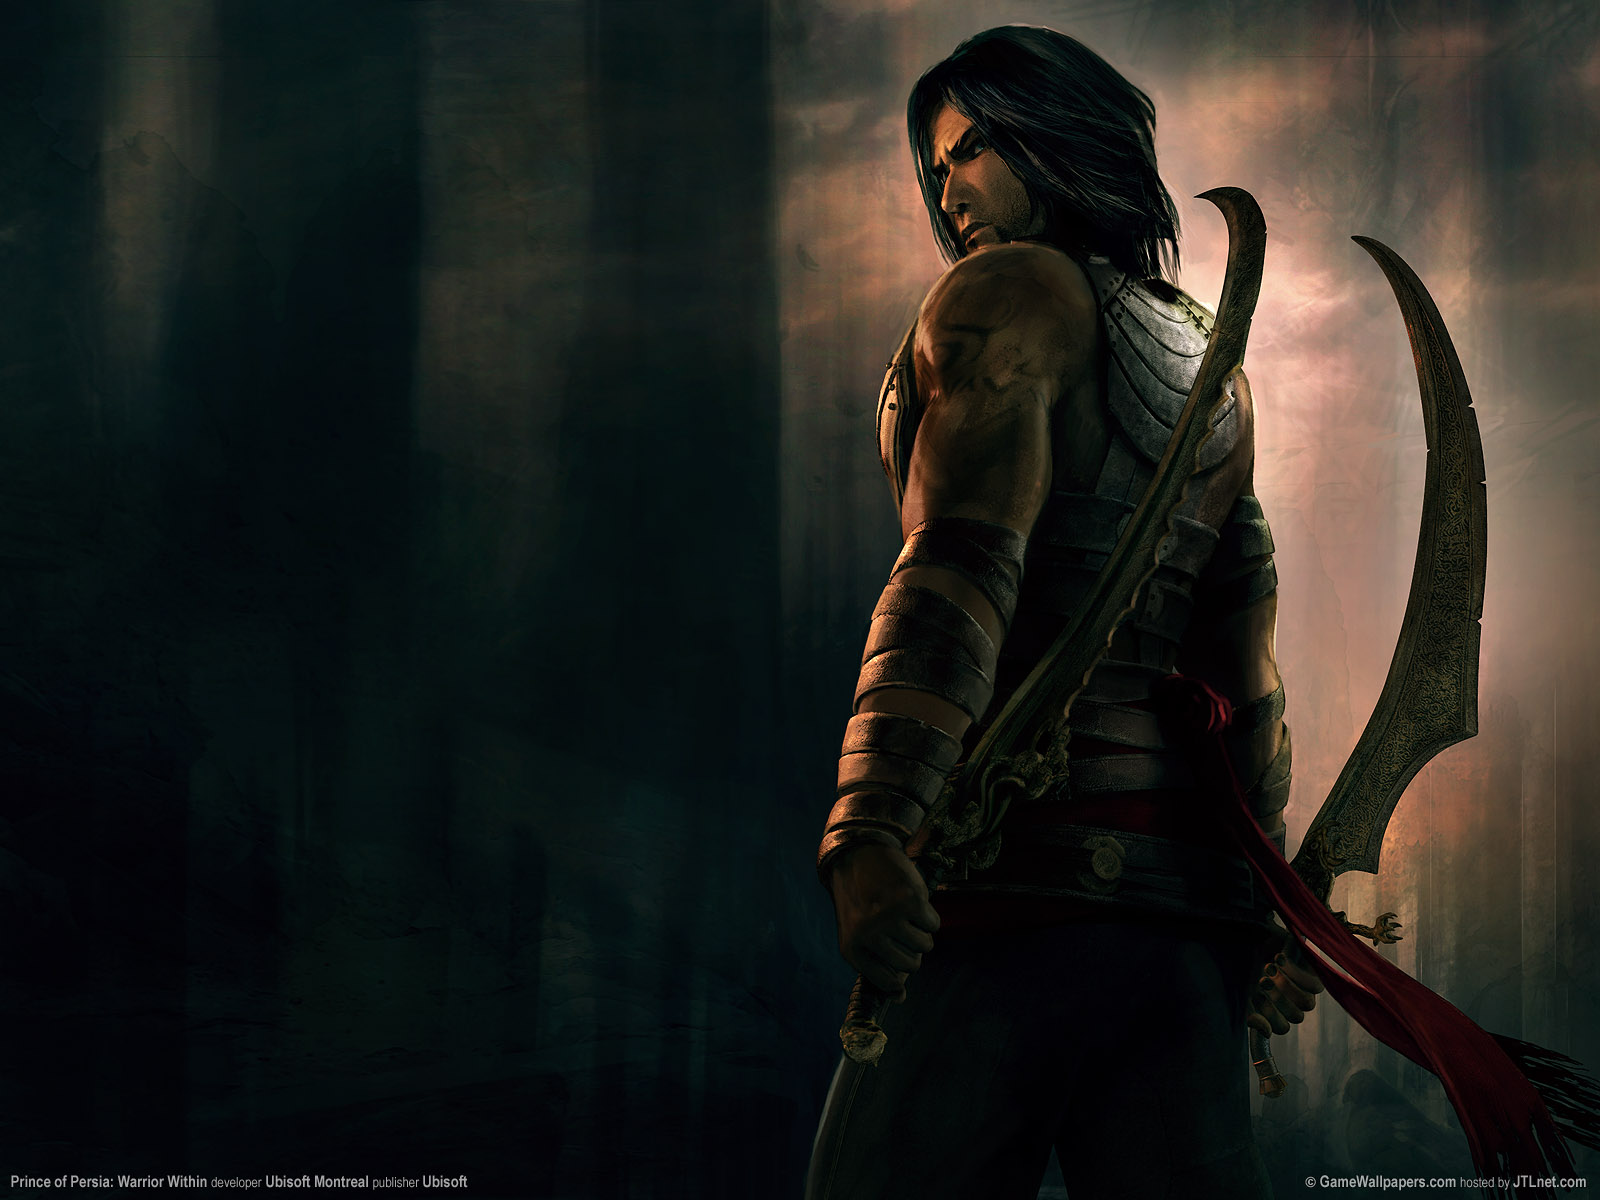 [72+] Prince Of Persia Warrior Within Wallpapers on ...